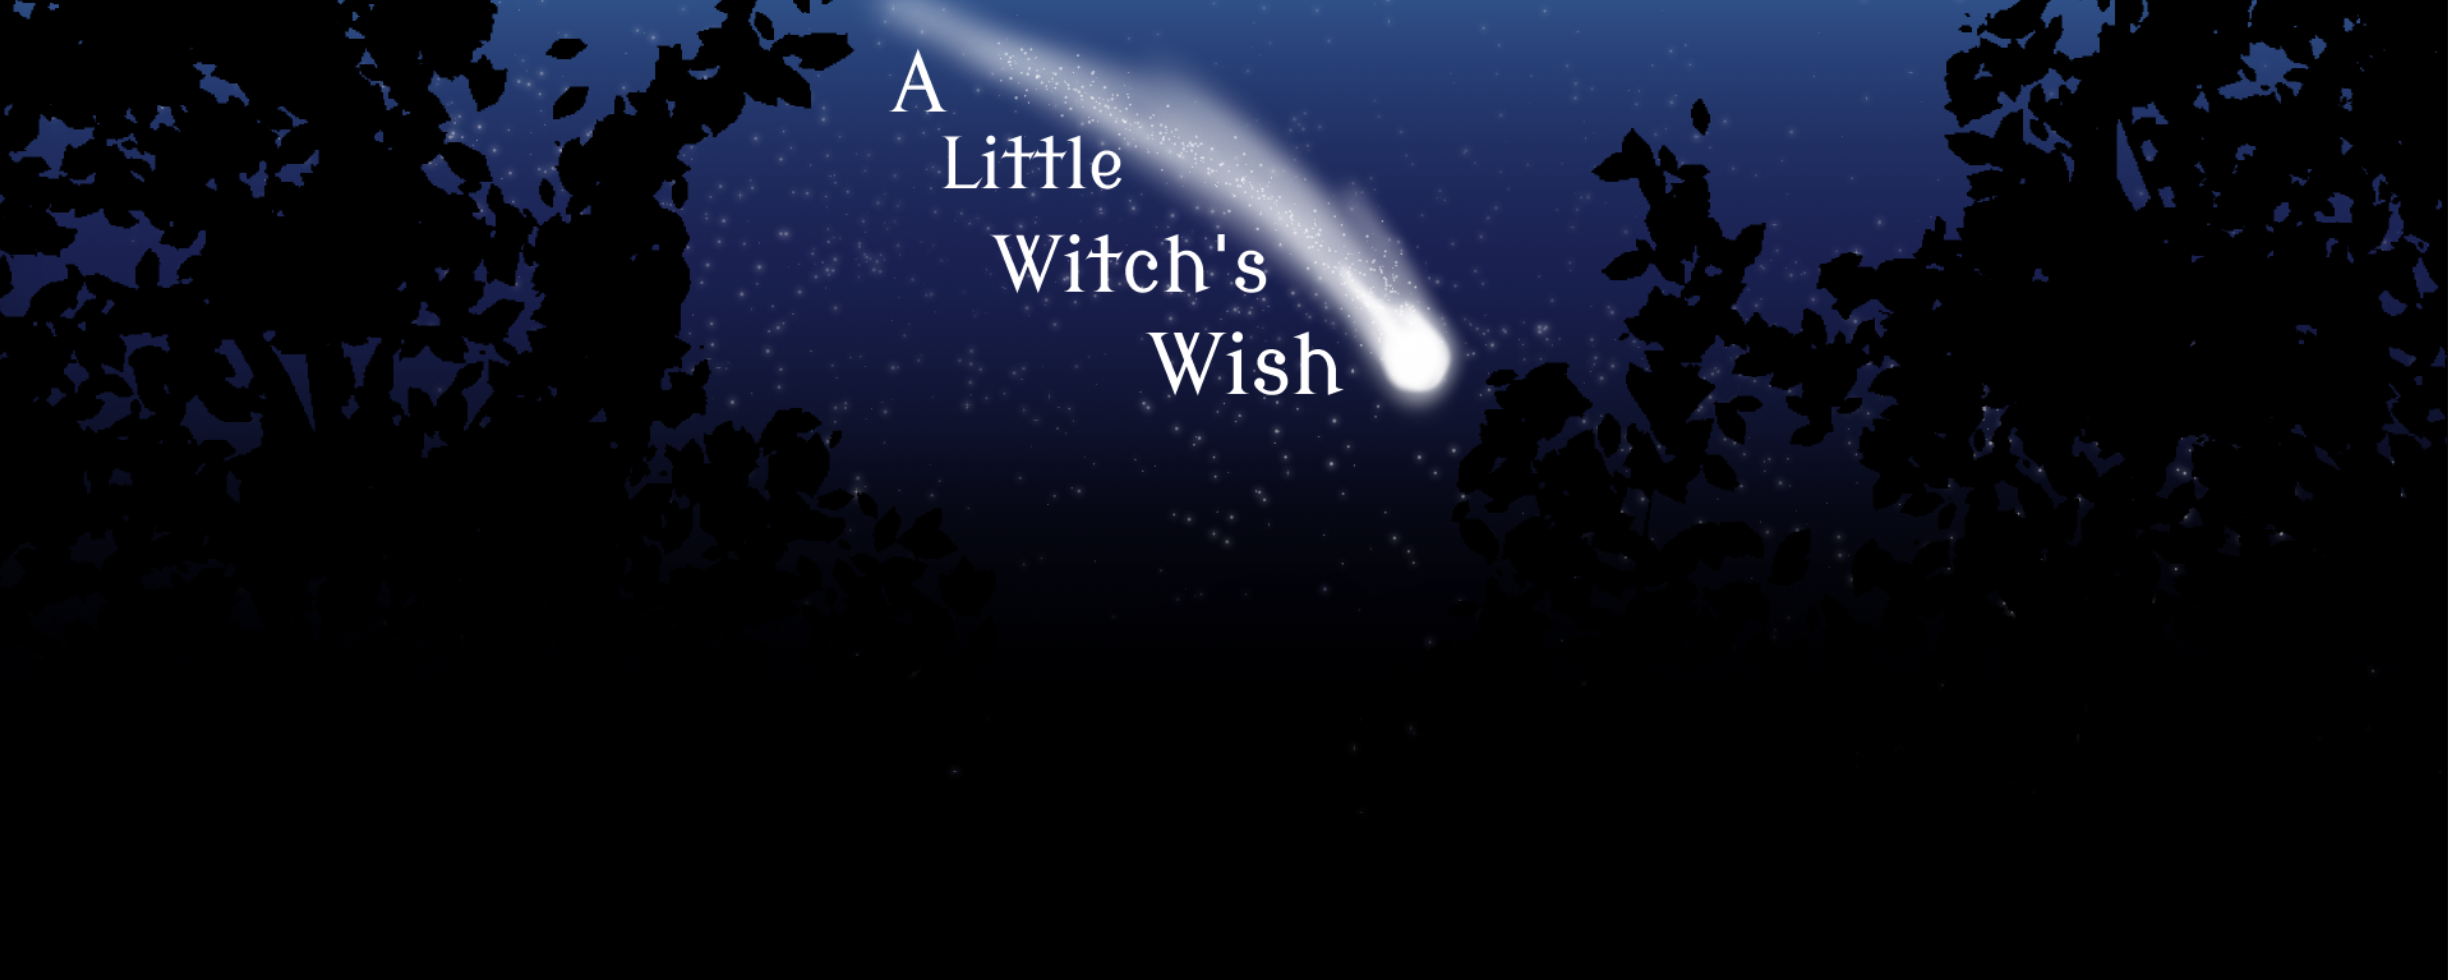 A Little Witch's Wish